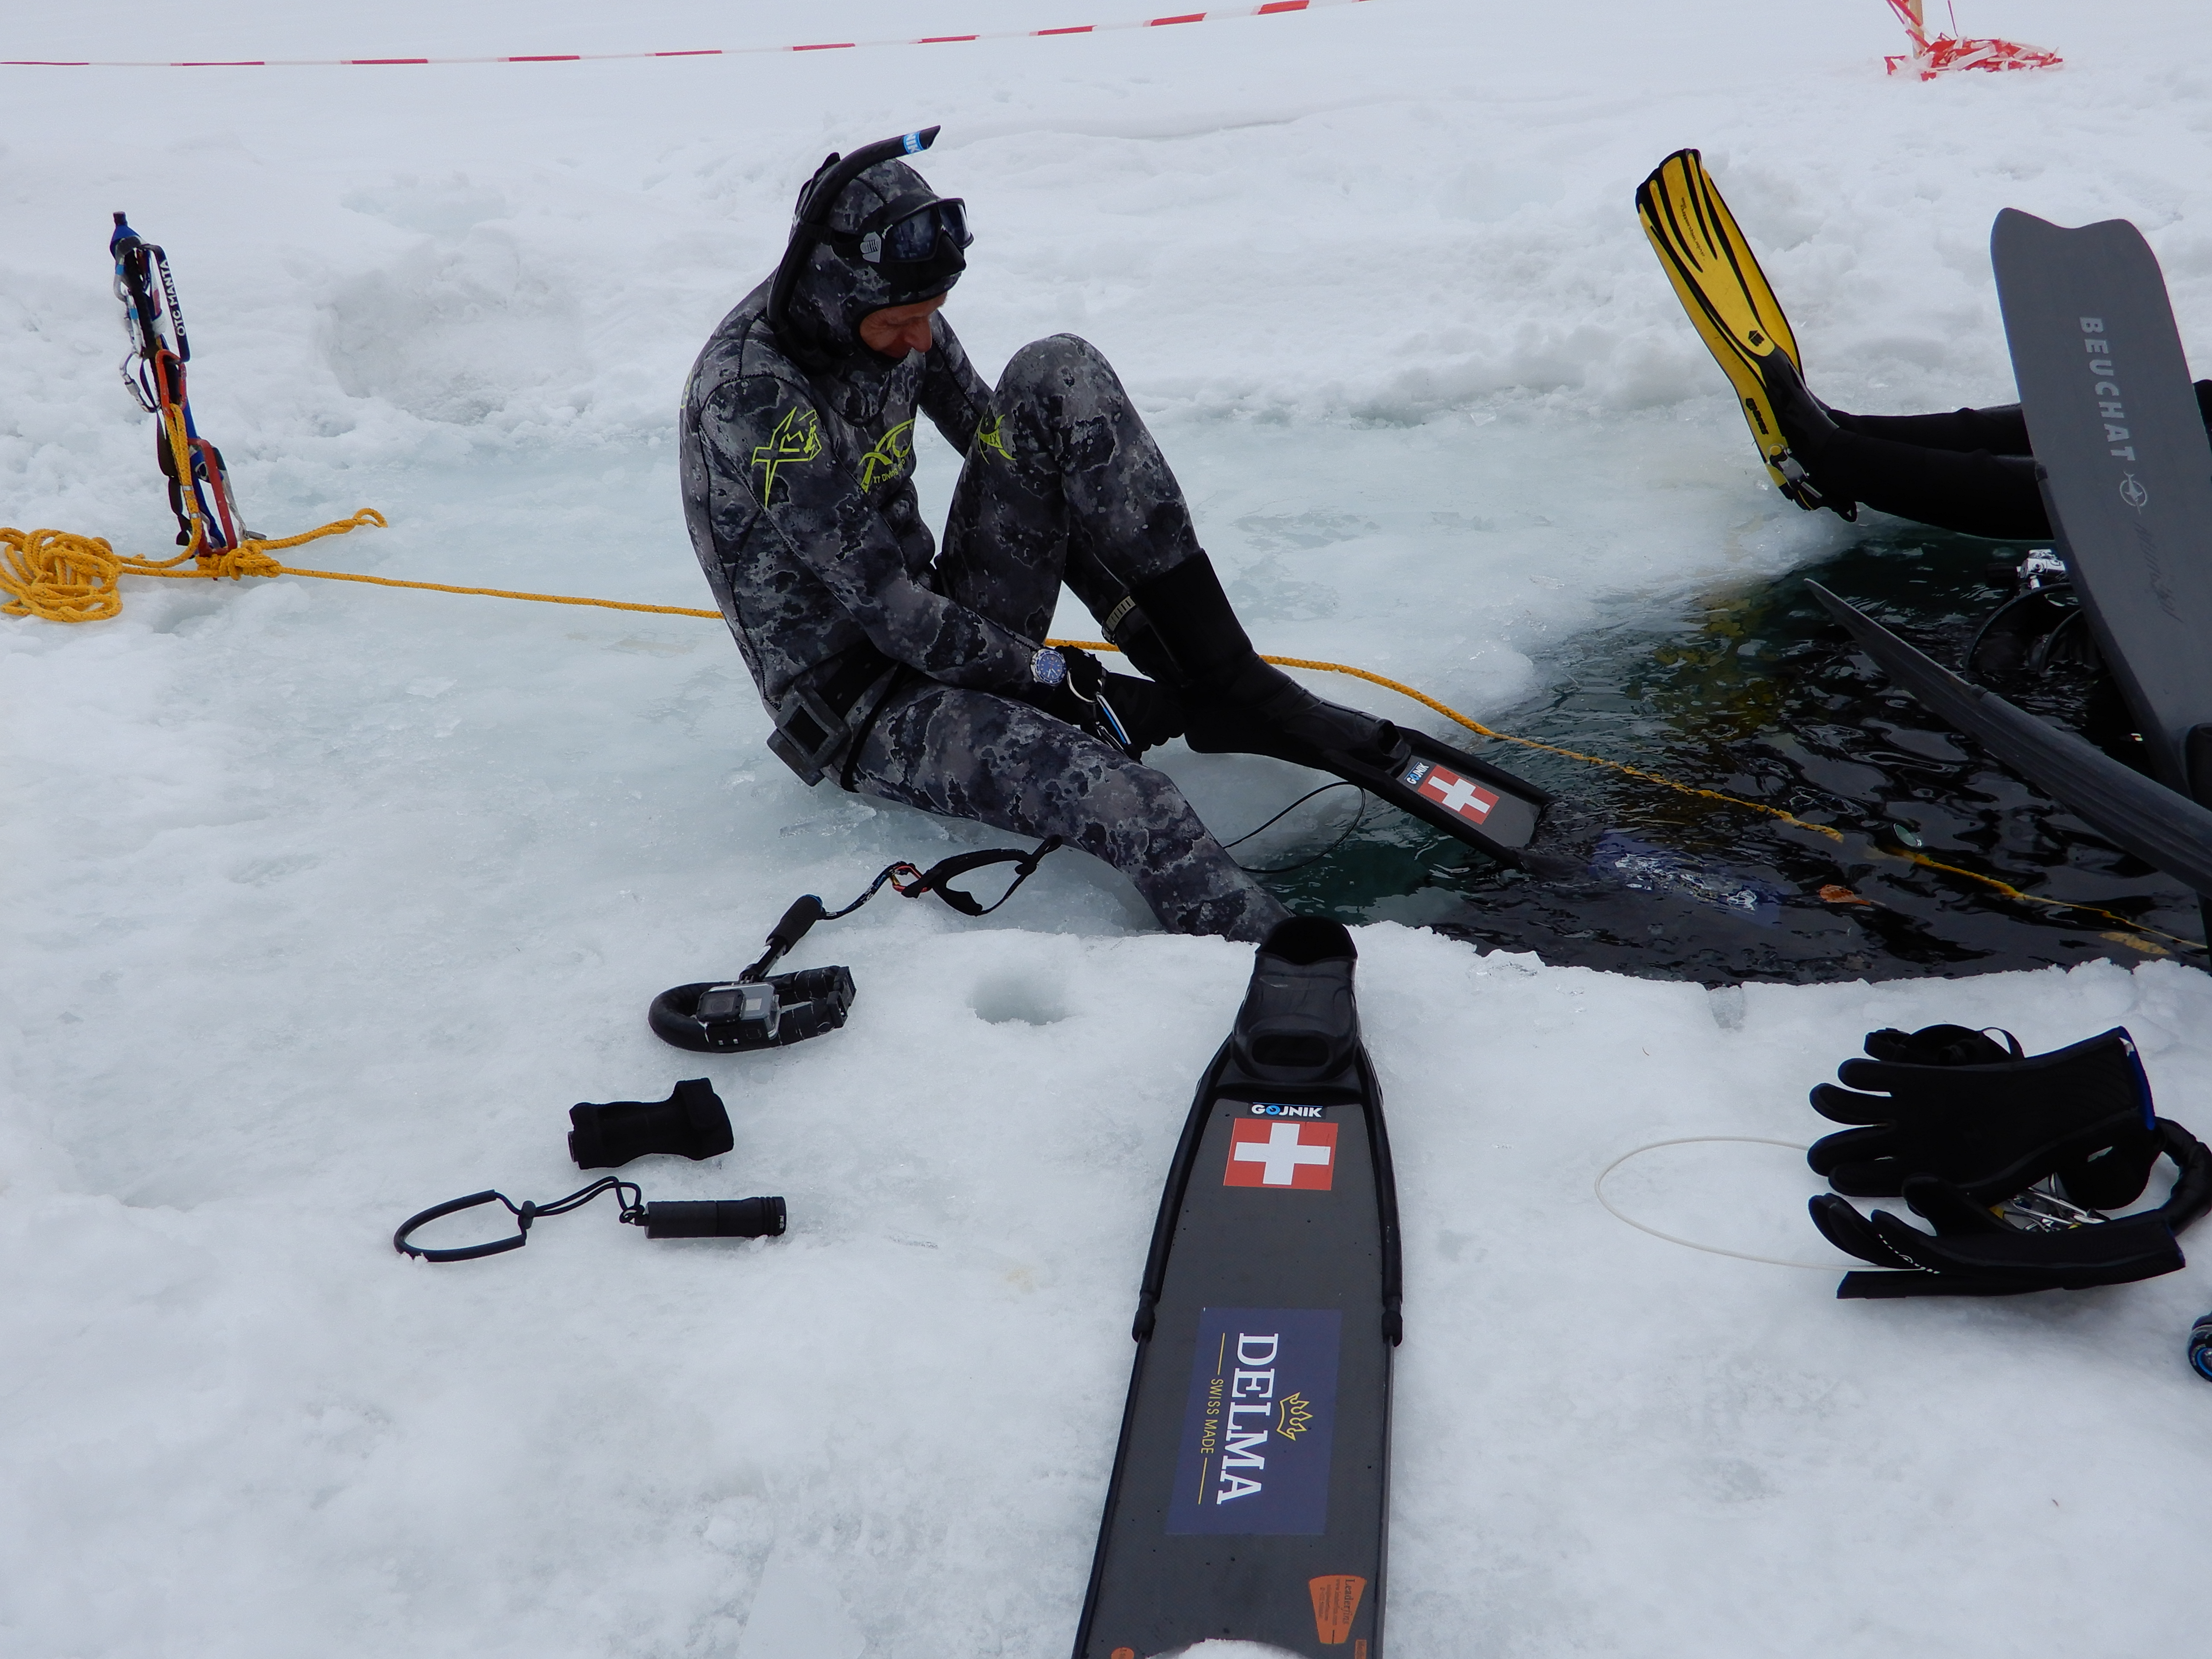 Freediver getting ready to dive under the ice